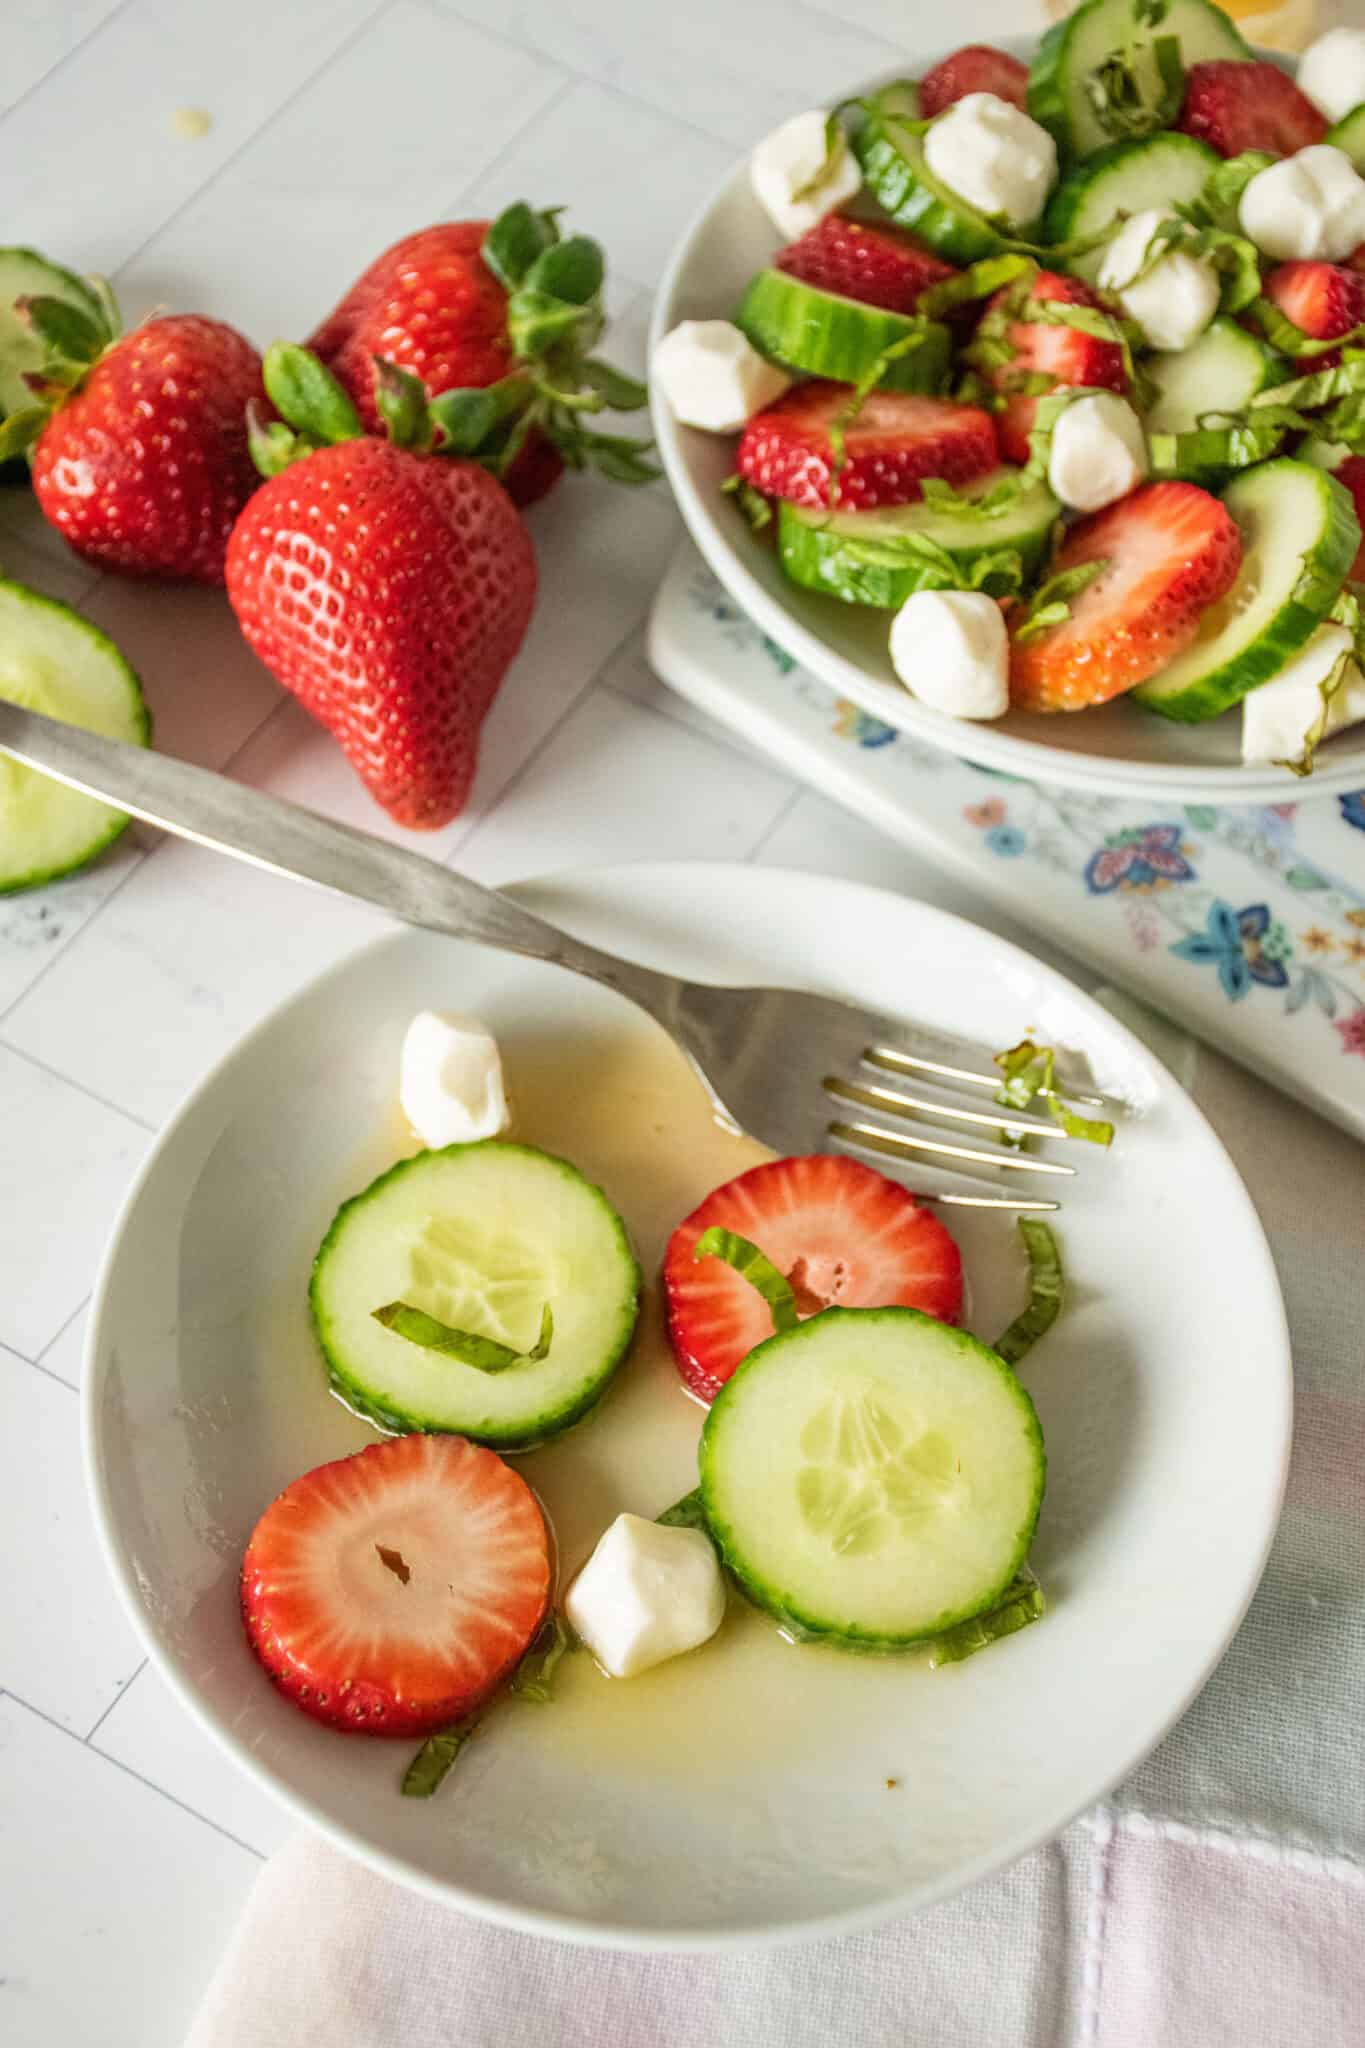 Cucumber strawberry salad with dressing, mostly eaten, on a plate.